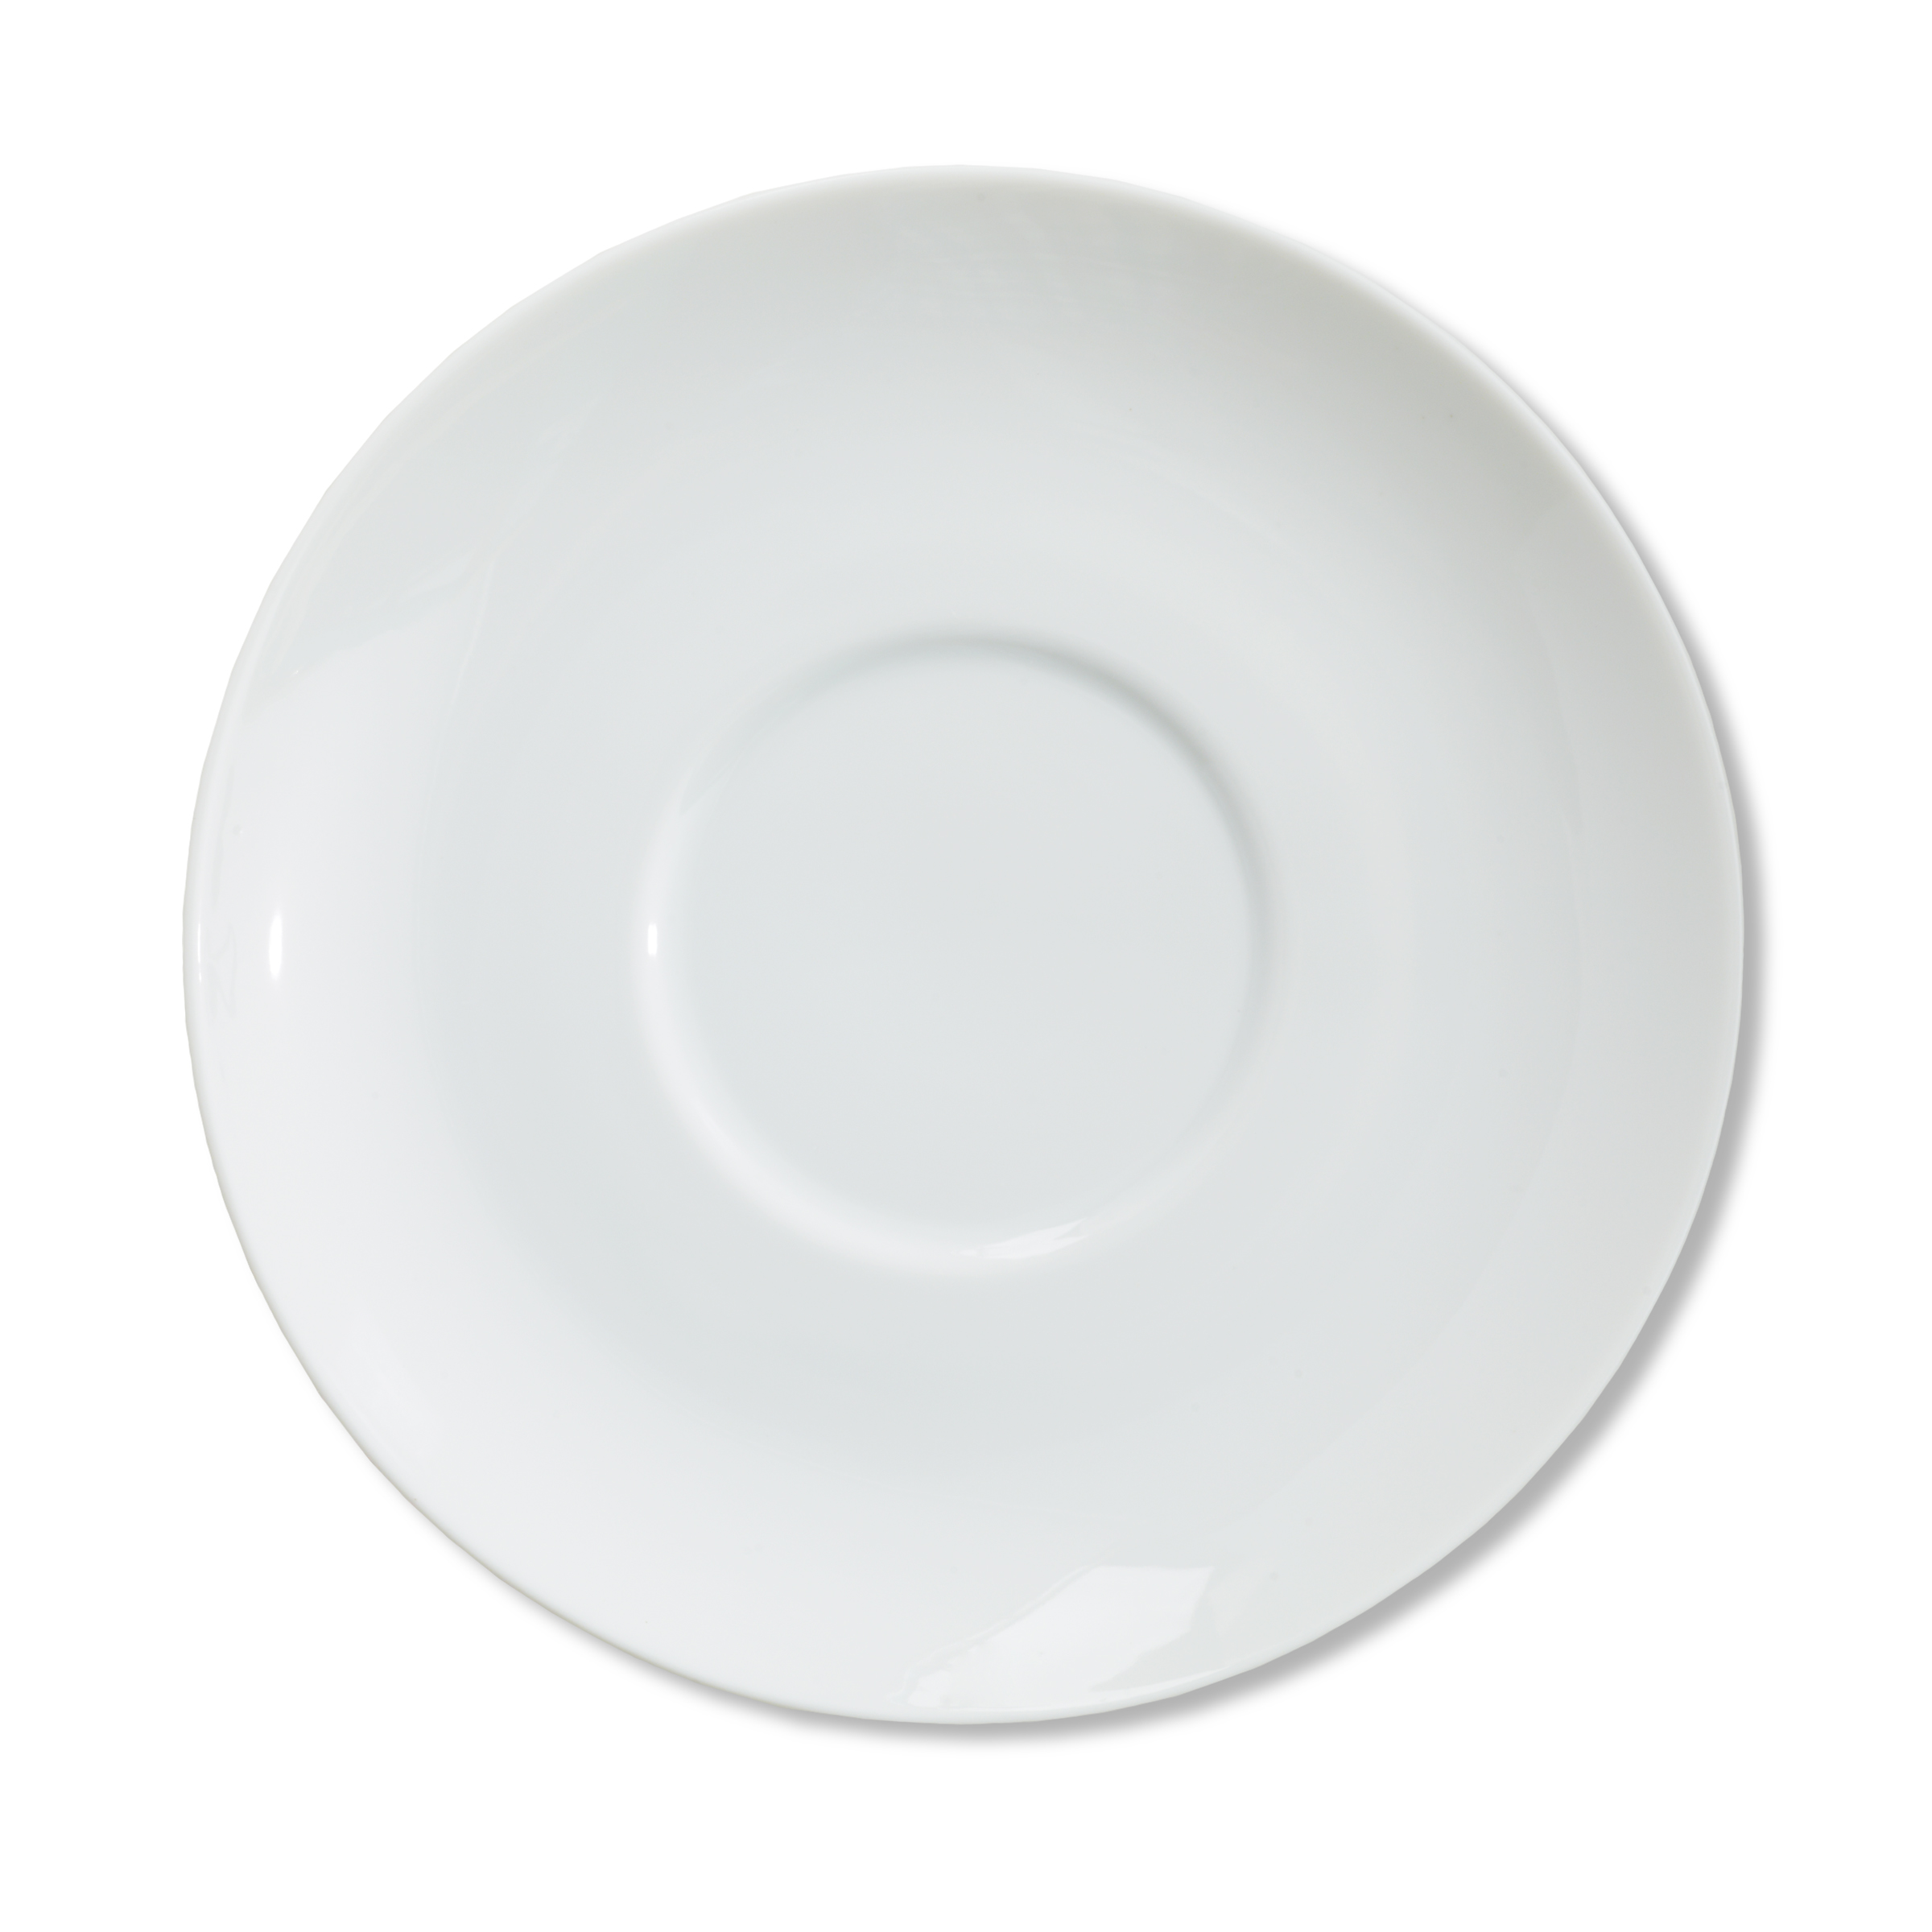 Alani, Coupe Saucer for Latte Cup, 7 1/8